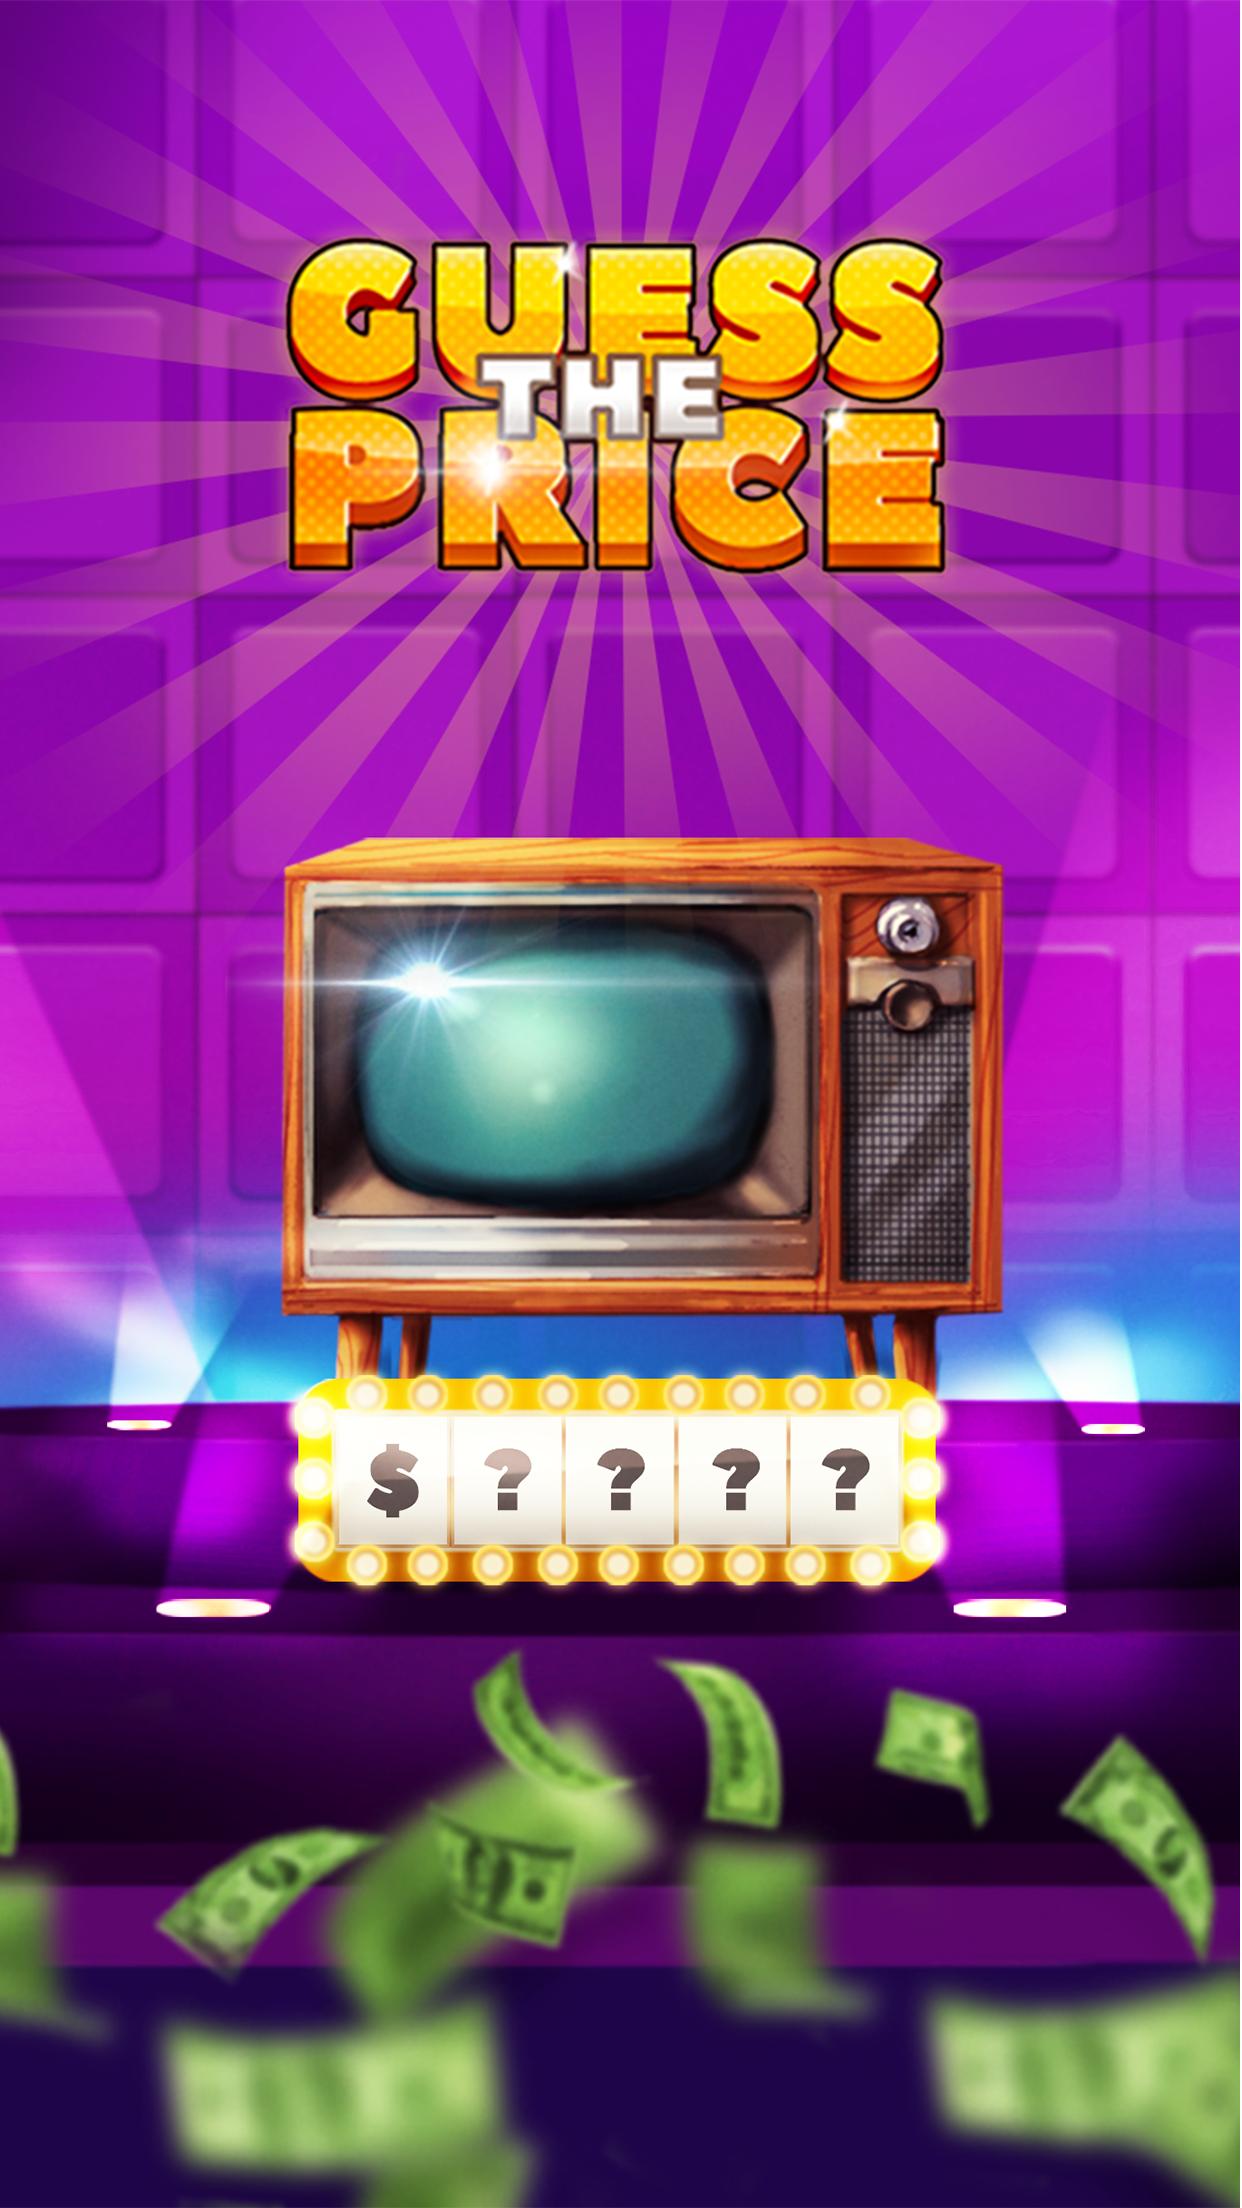 Guess The Price for Android - APK Download